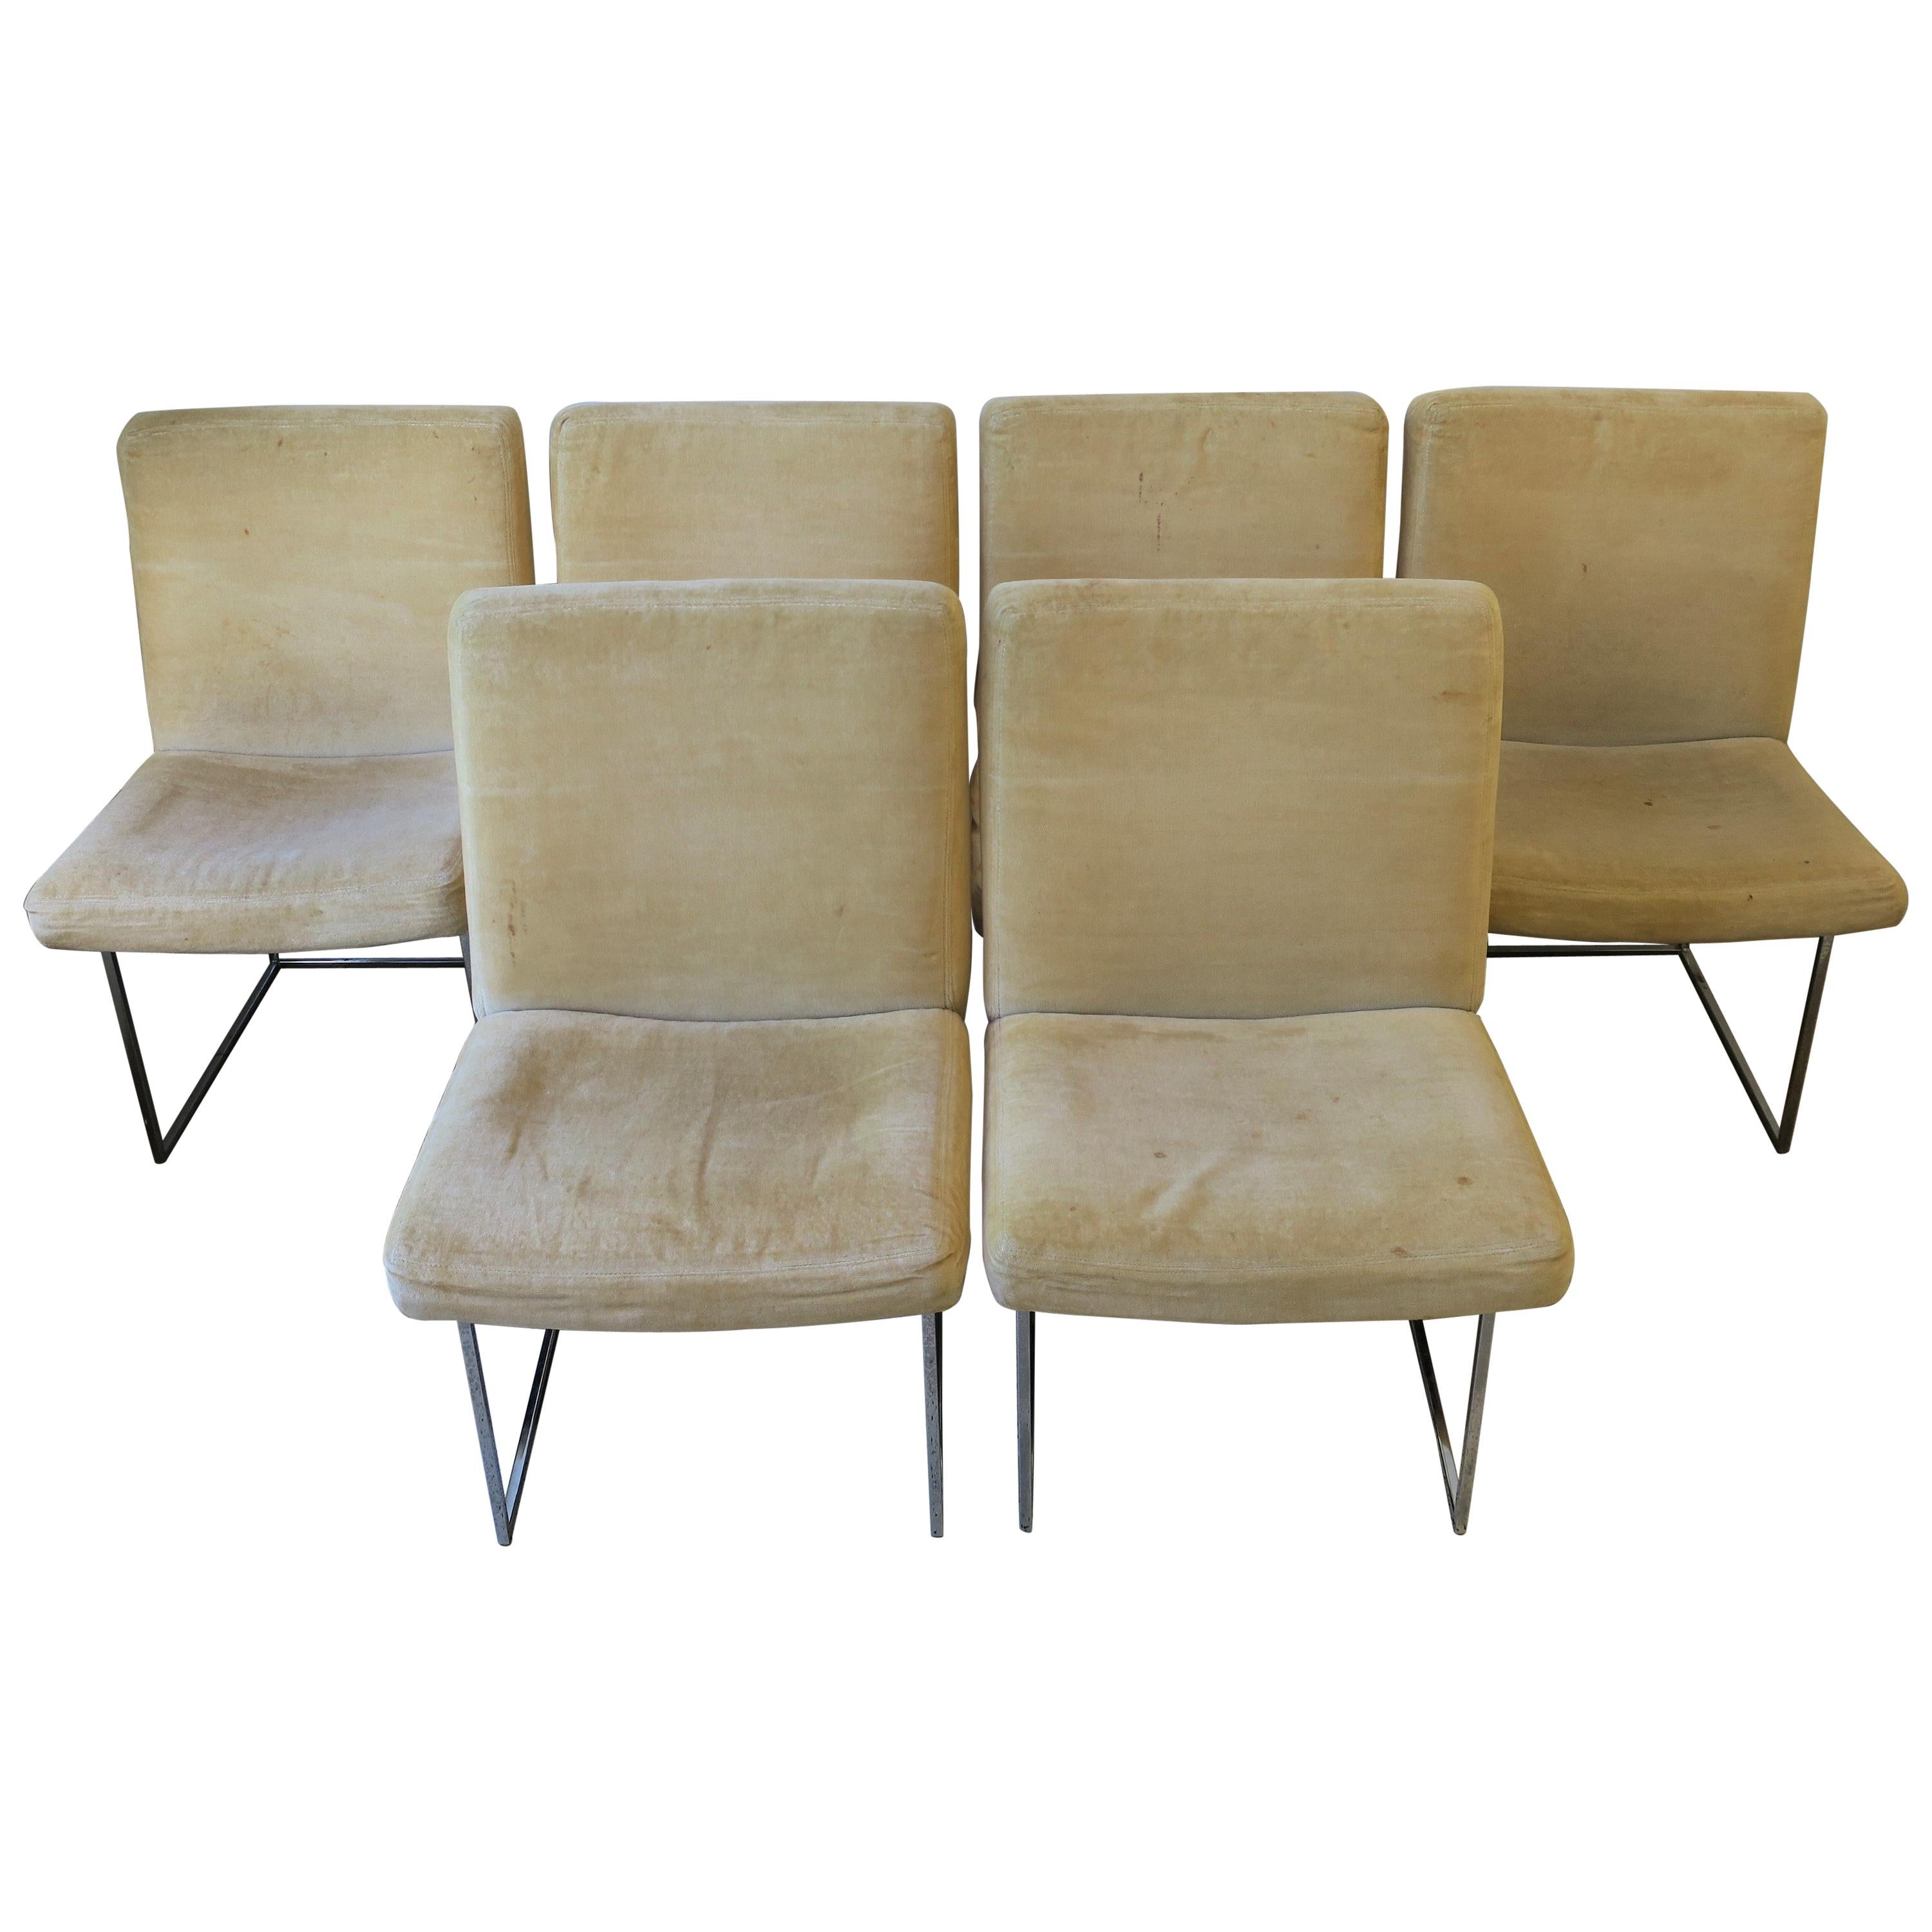 Set of 6 Post-Modern Milo Baughman for Thayer Coggin Dinning Chairs, ca. 1970s